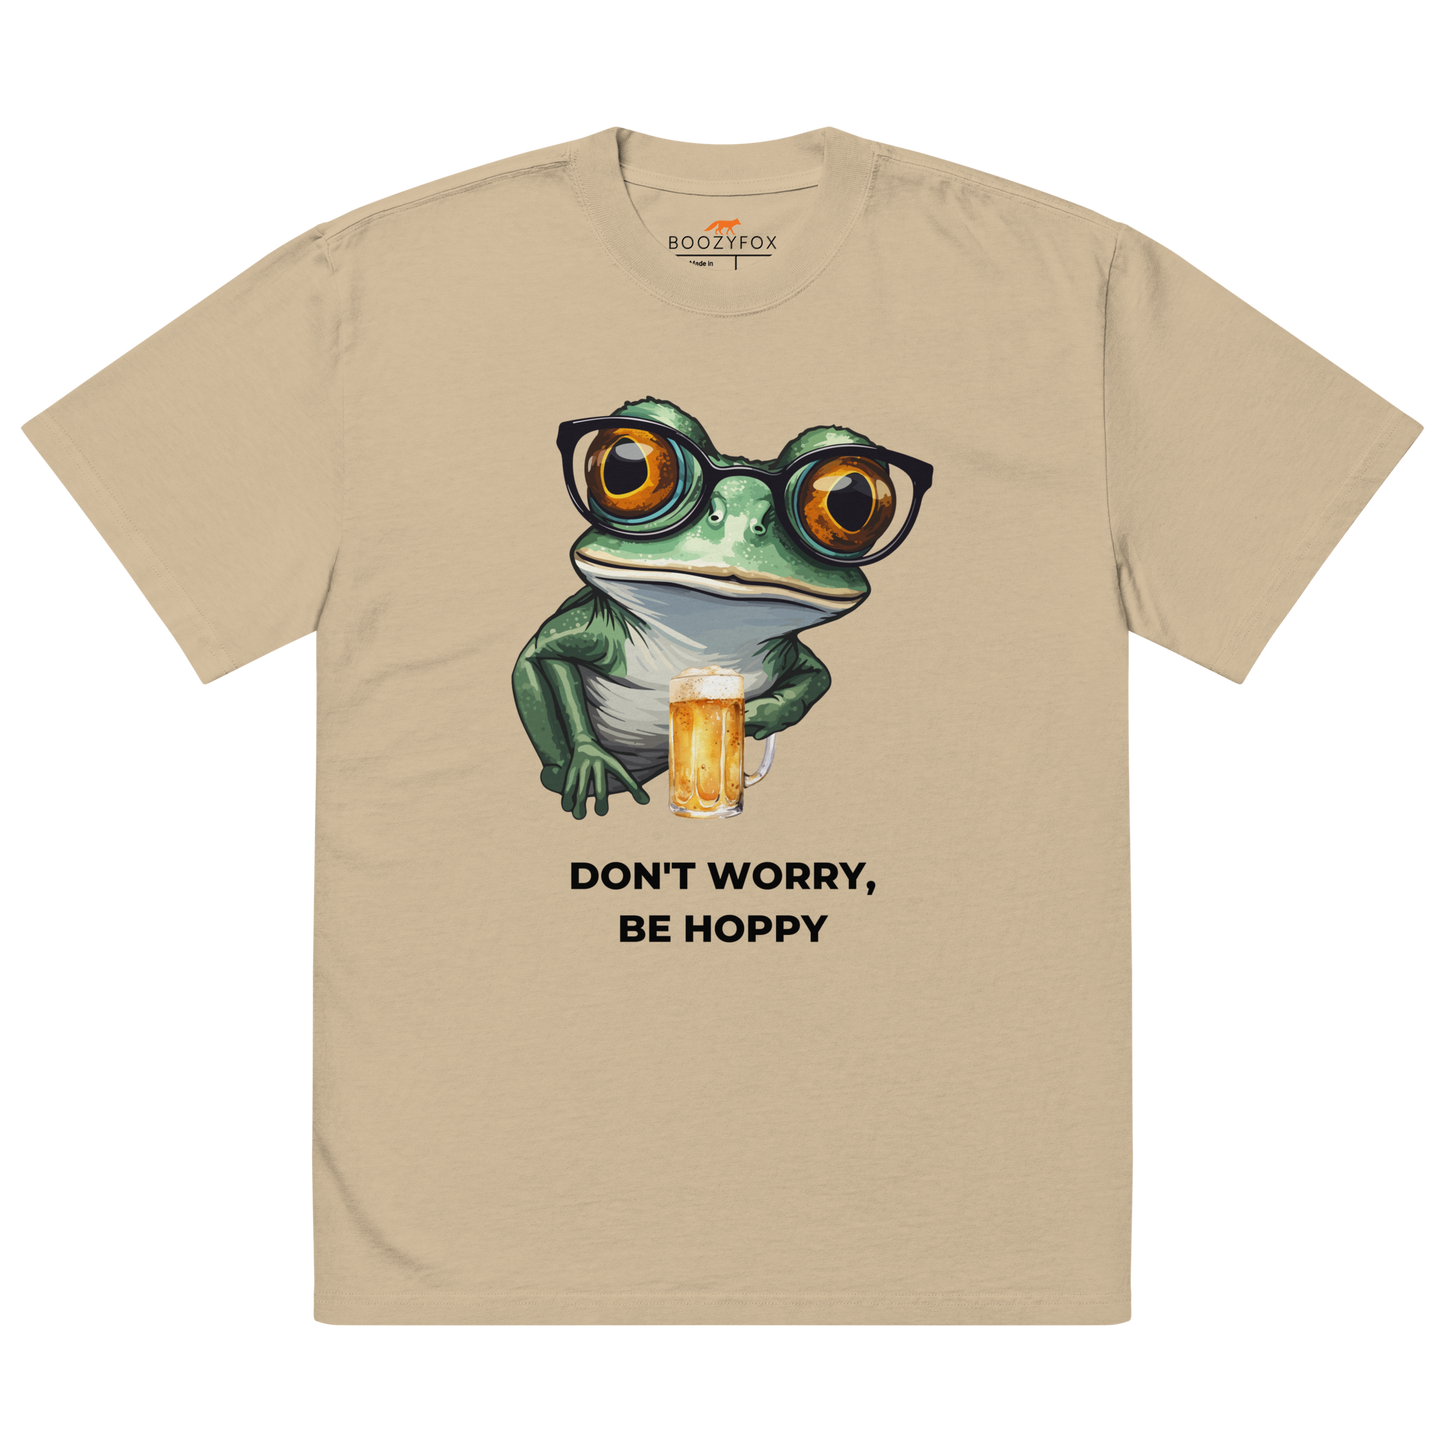 Faded Khaki Frog Oversized T-Shirt featuring a ribbitting Don't Worry, Be Hoppy graphic on the chest - Funny Graphic Frog Oversized Tees - Boozy Fox